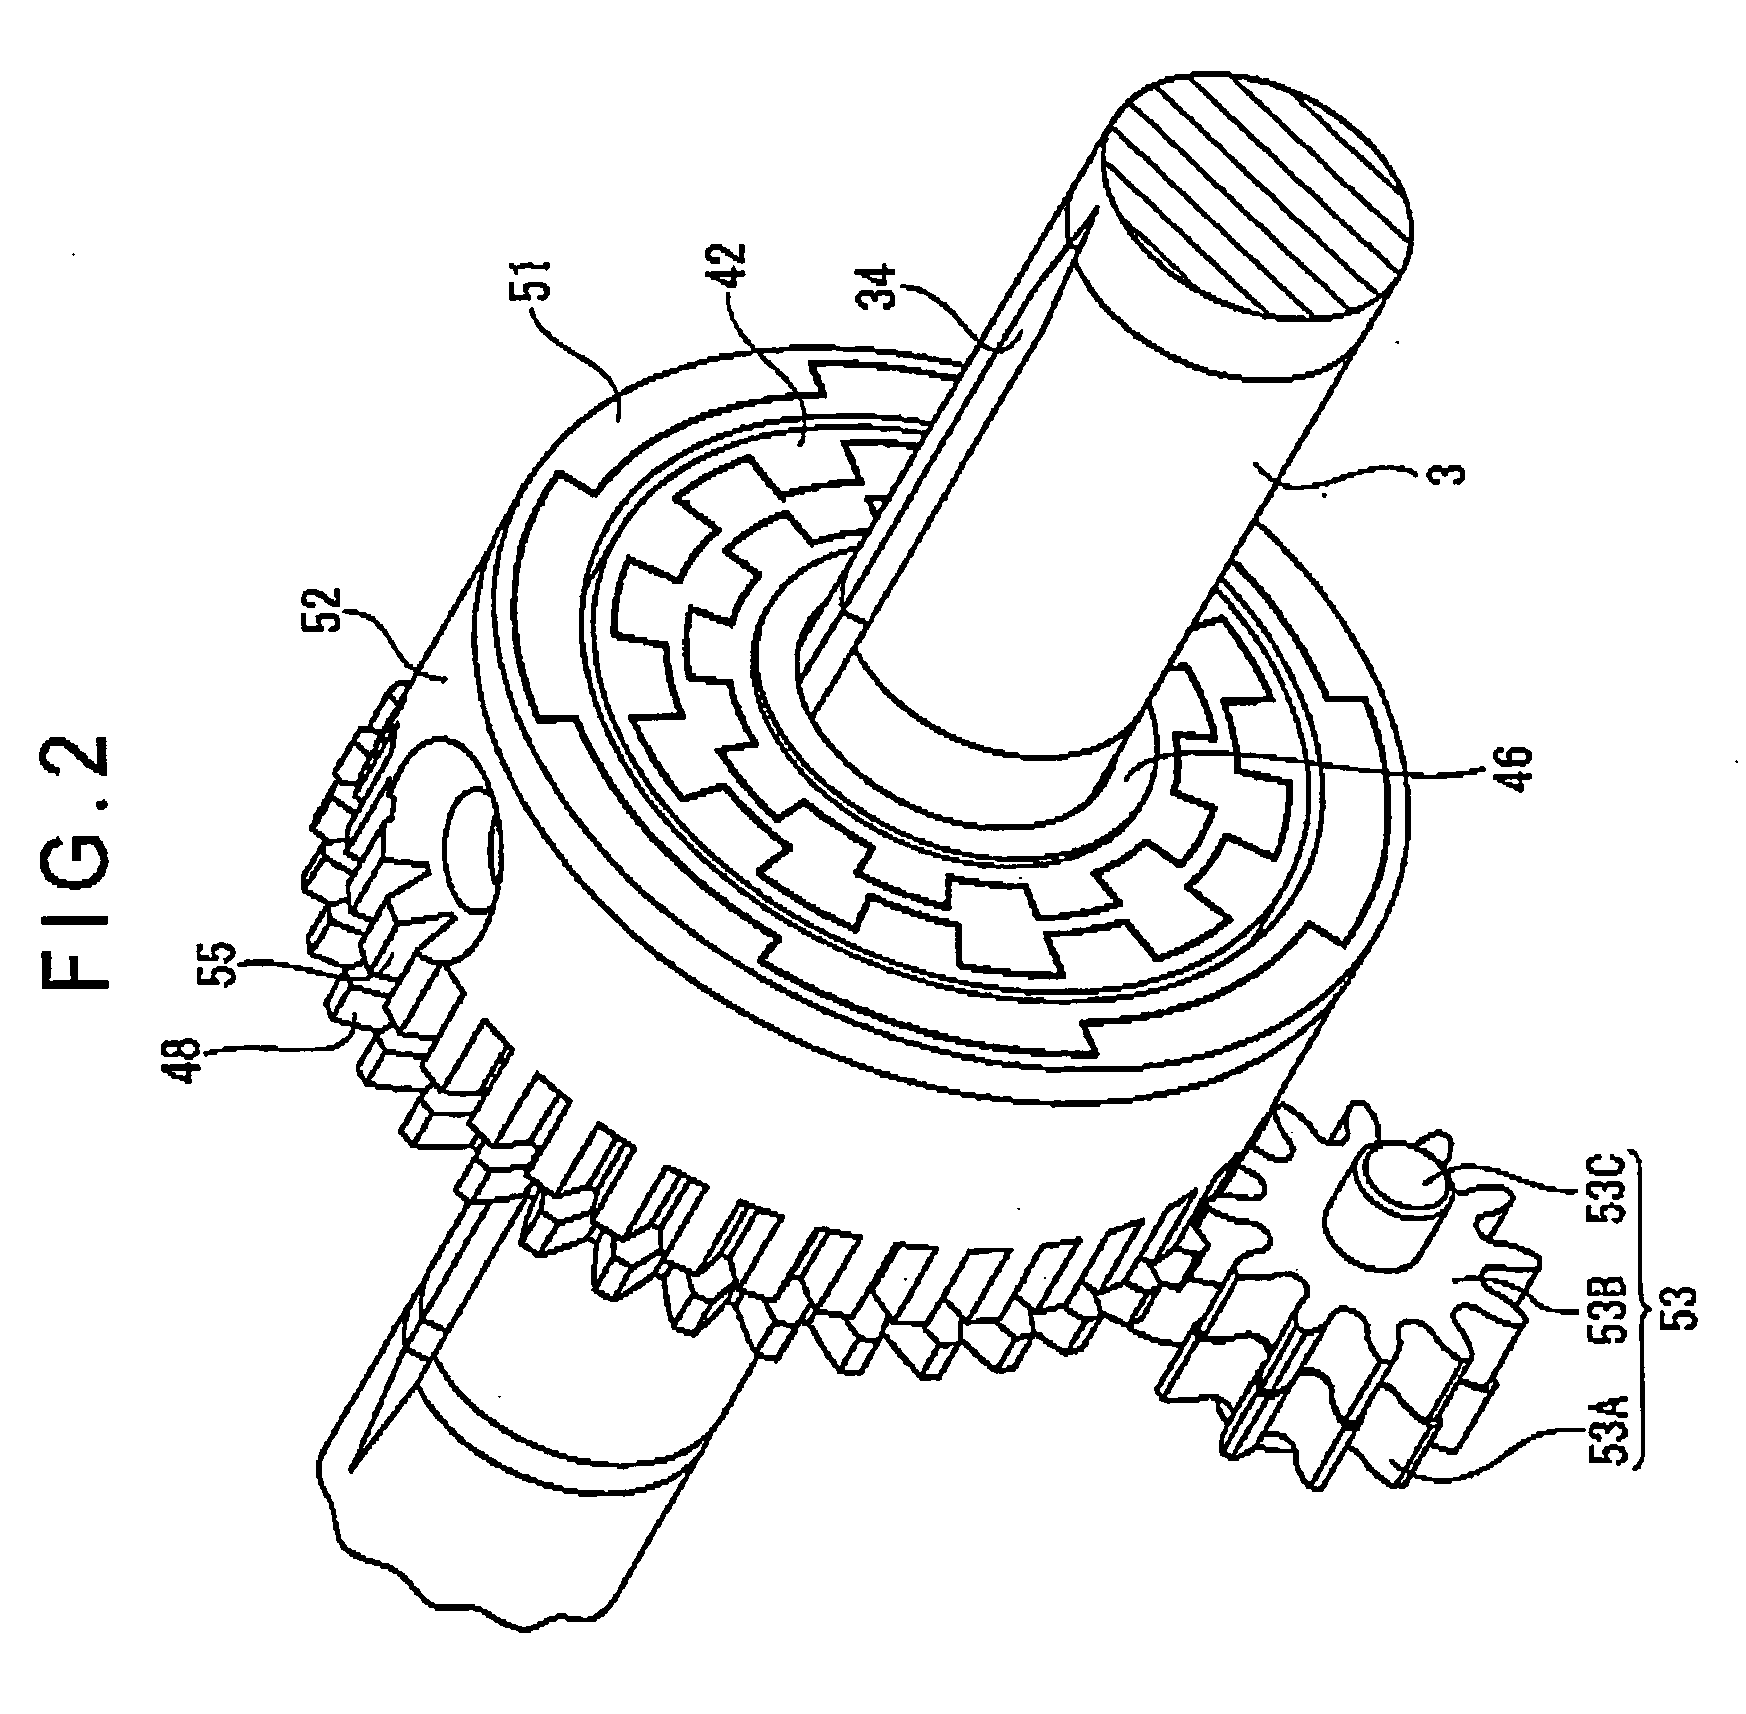 Absolute position measuring apparatus